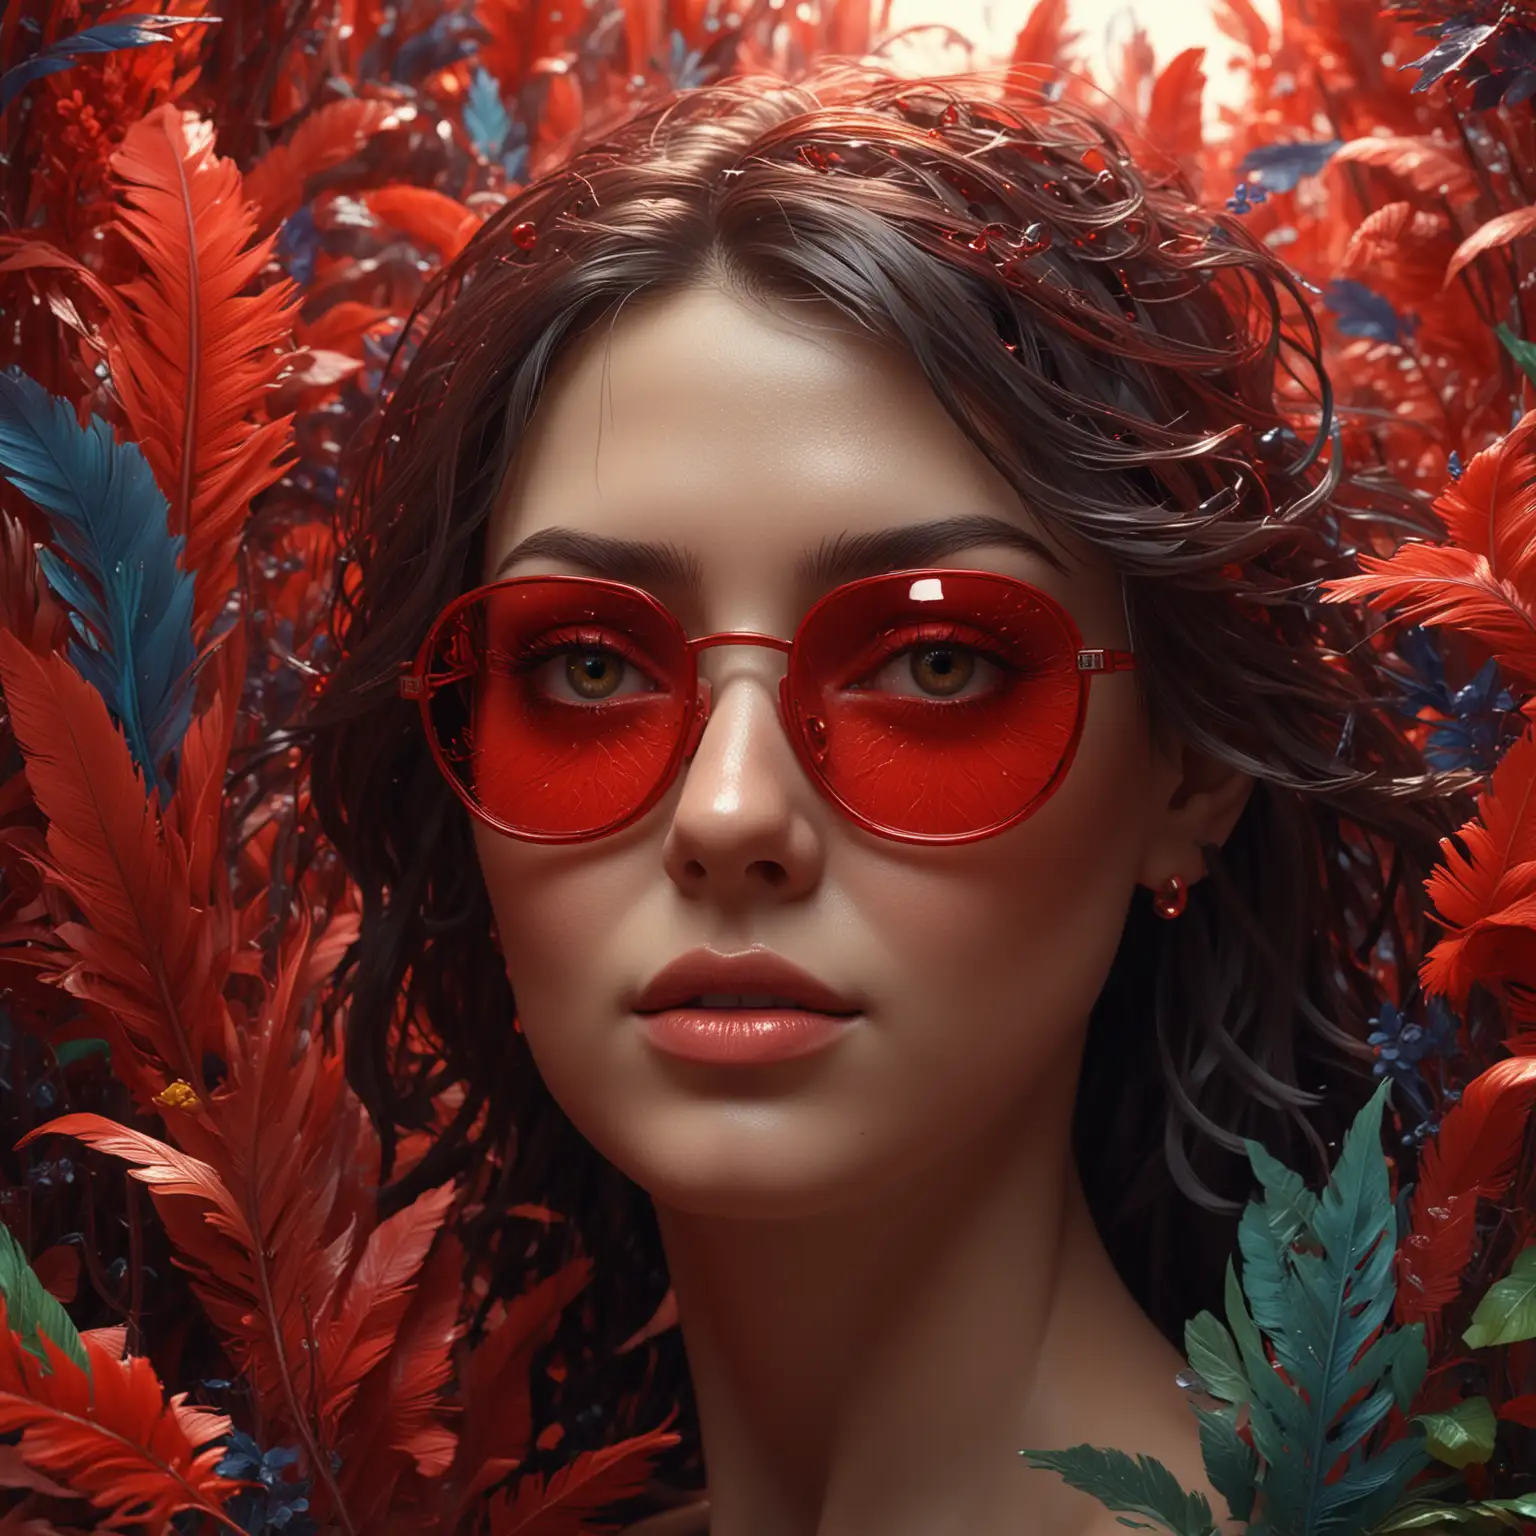 Ethereal Woman in Glasses Surreal Red Artwork with Dramatic Shading